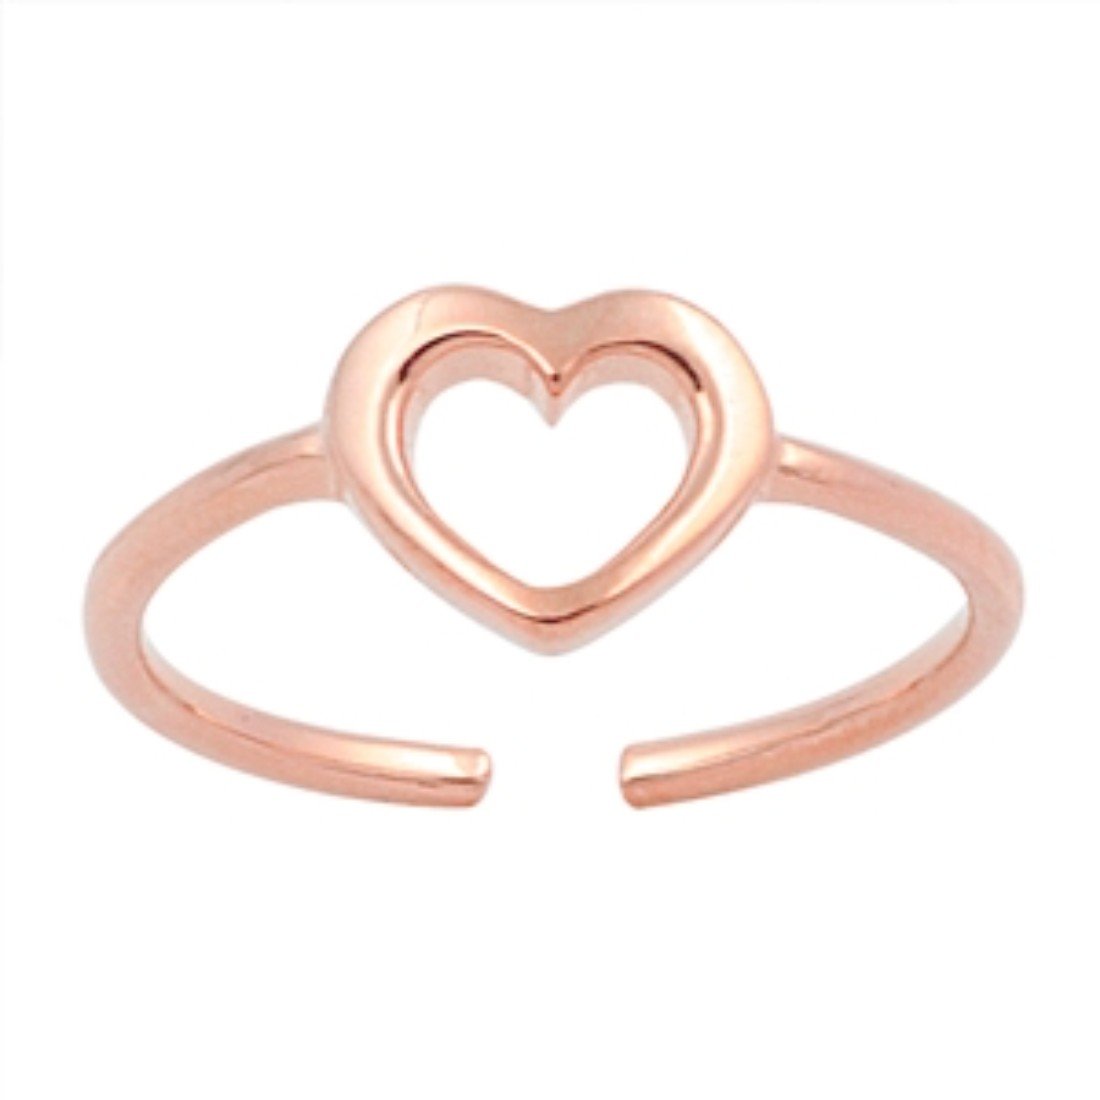 Rose Tone, Silver Heart Toe Ring Adjustable Band 925 Sterling Silver (6mm)